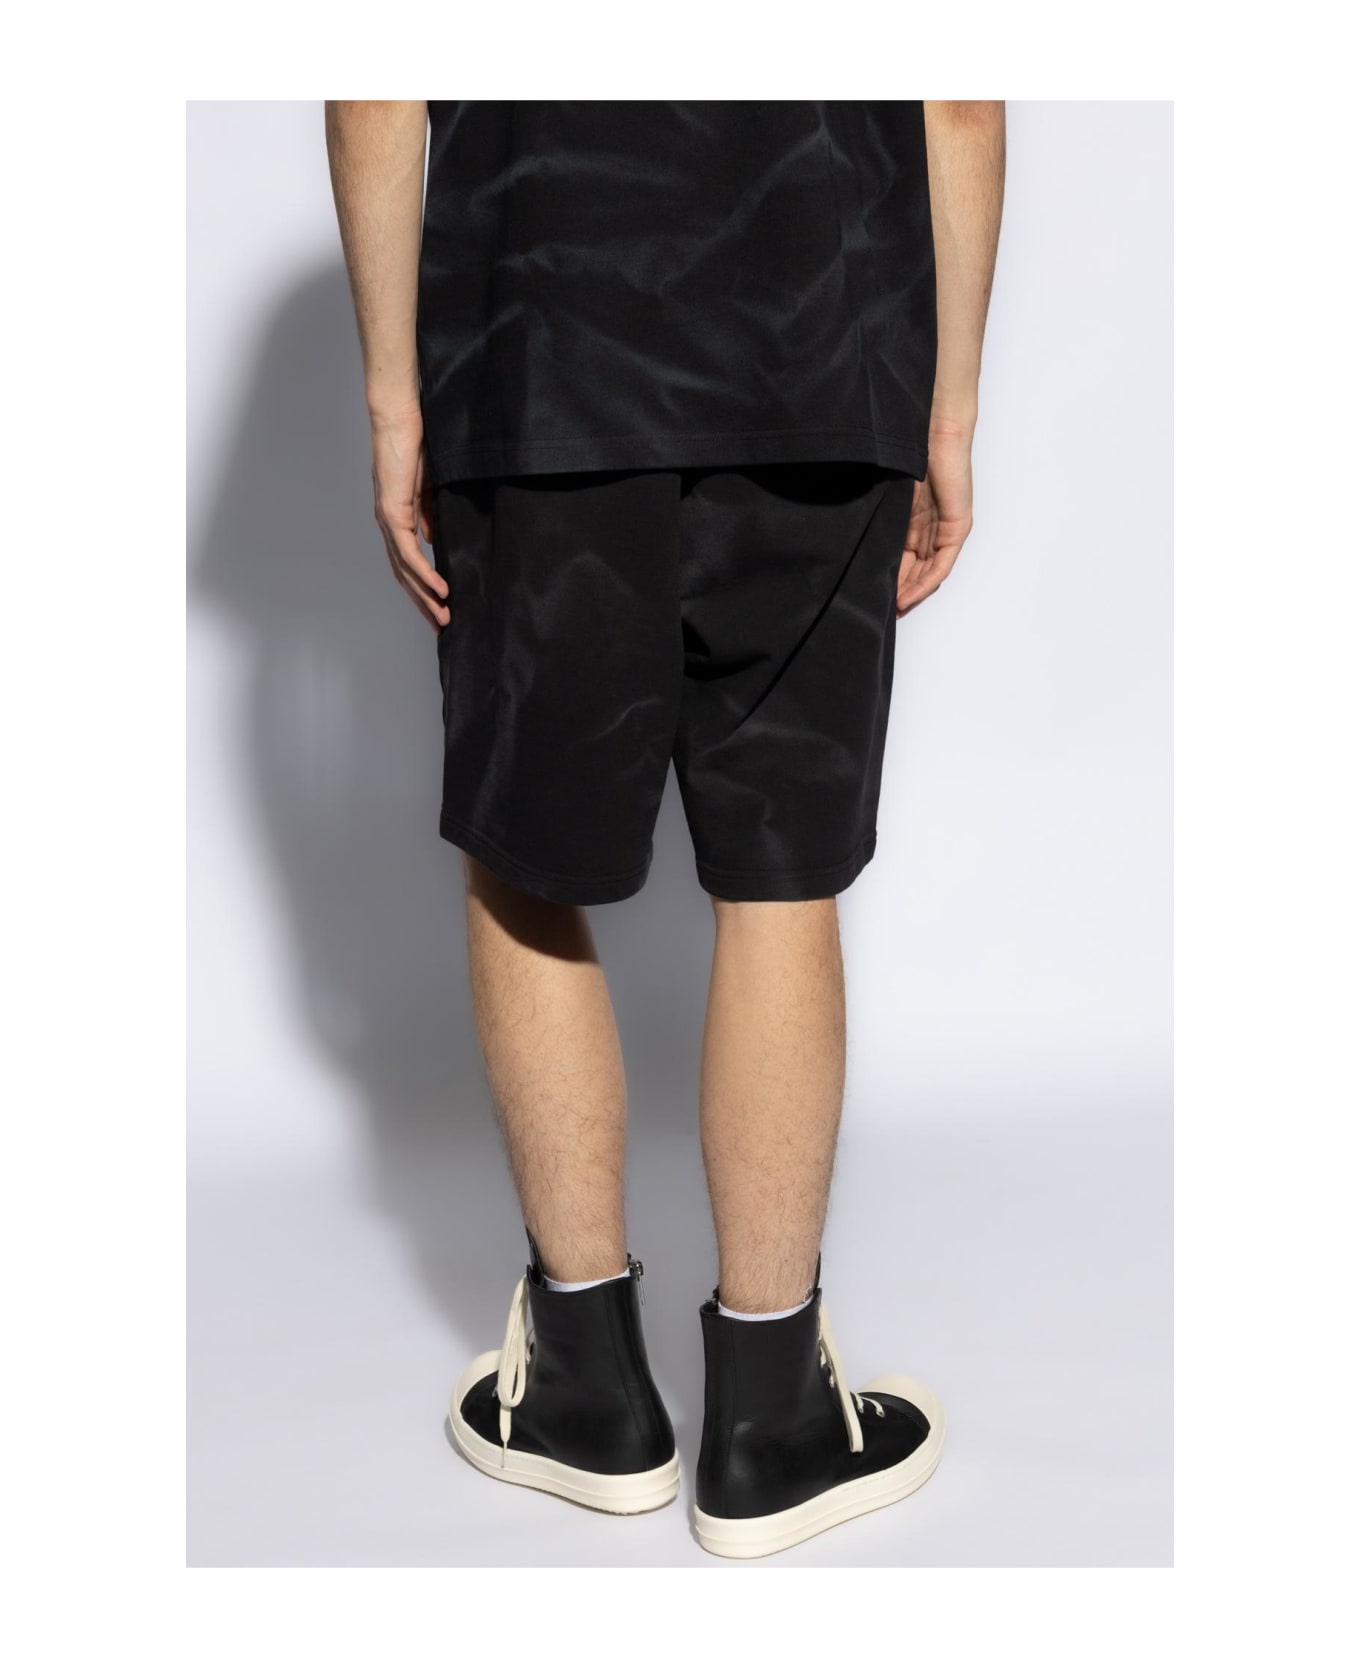 44 Label Group Cotton Shorts With Print - Black ショートパンツ